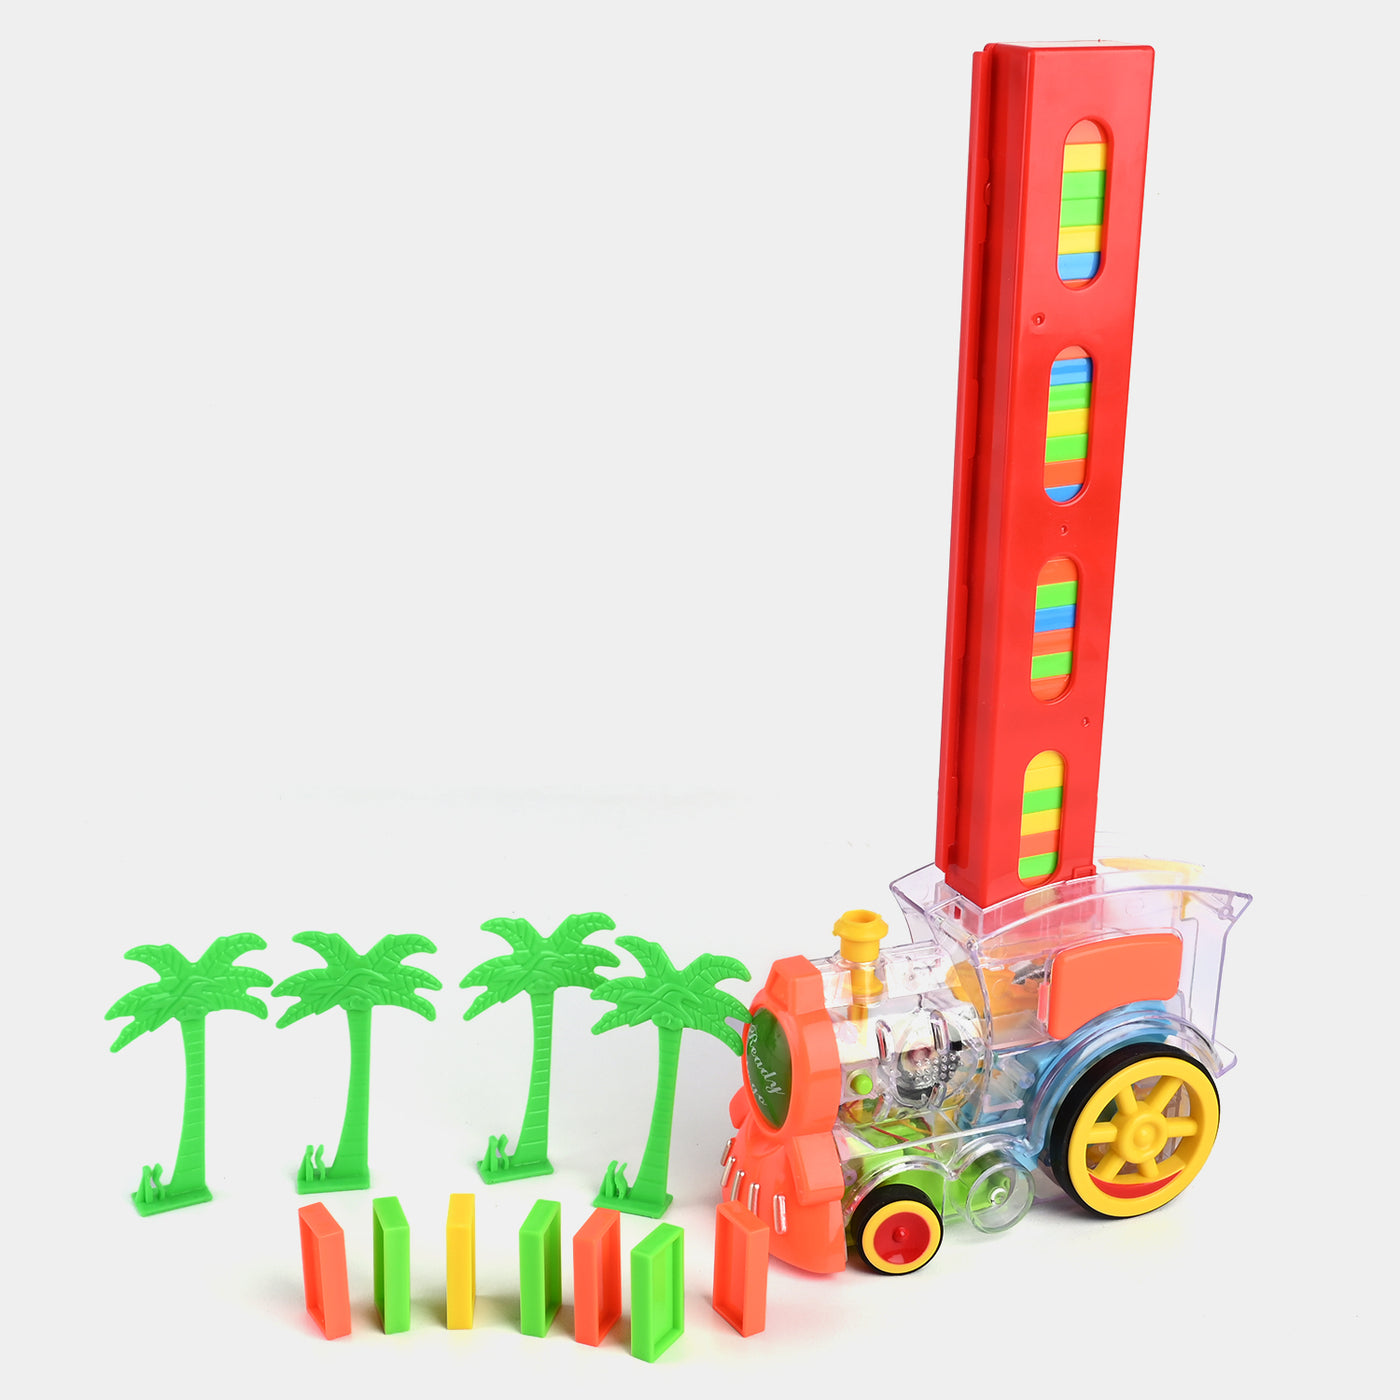 Domino Train With Light & Music Toy For Kids